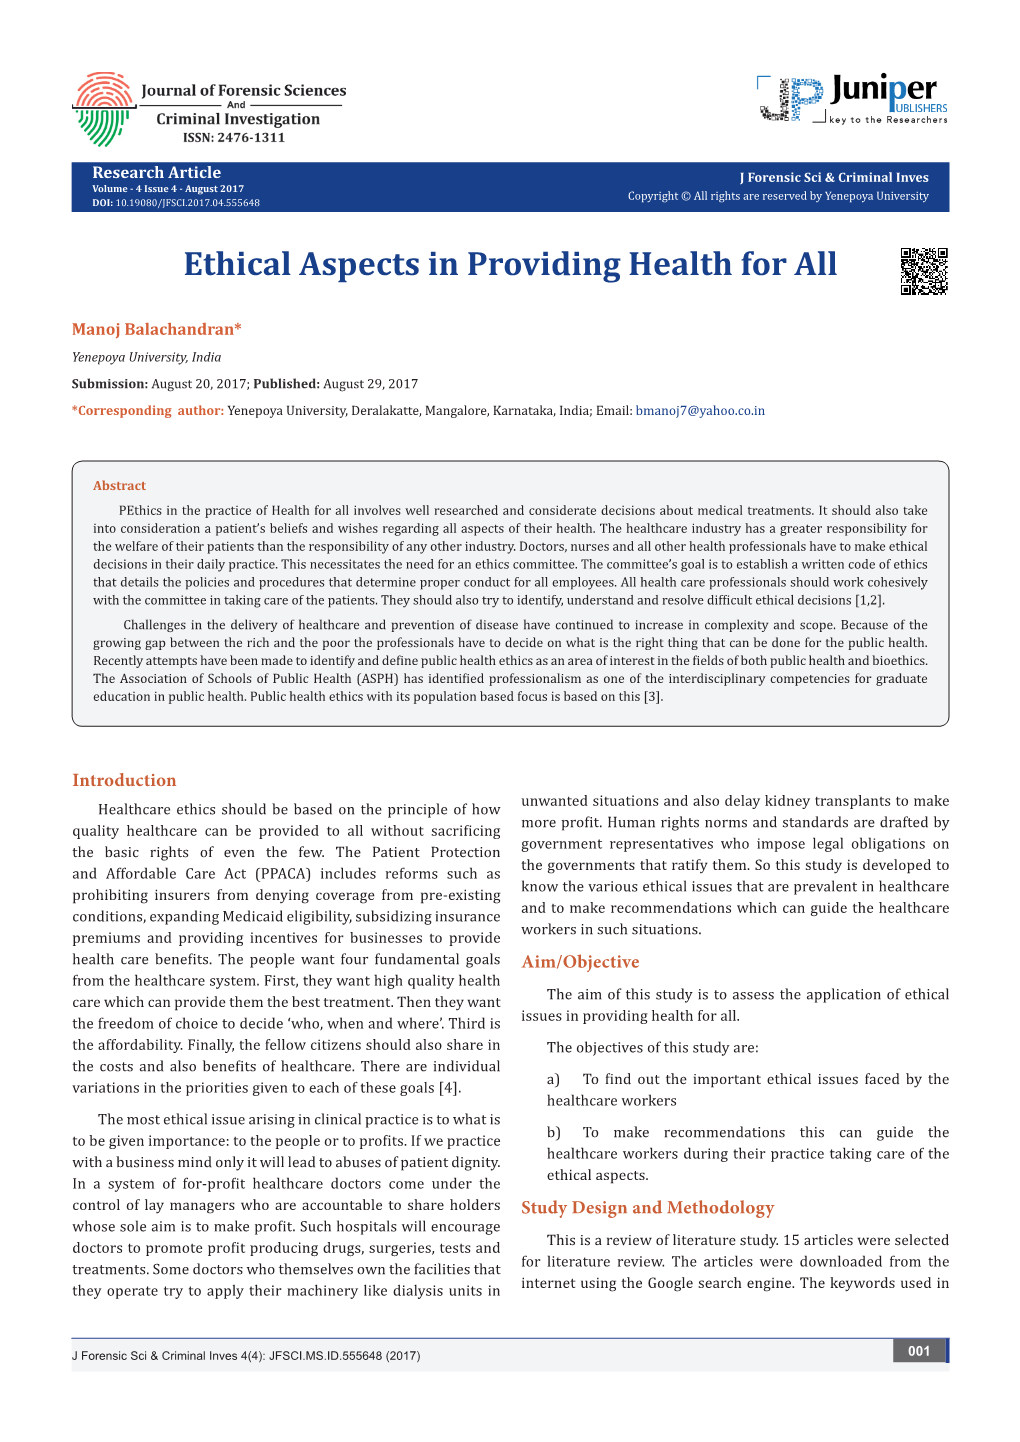 Ethical Aspects in Providing Health for All